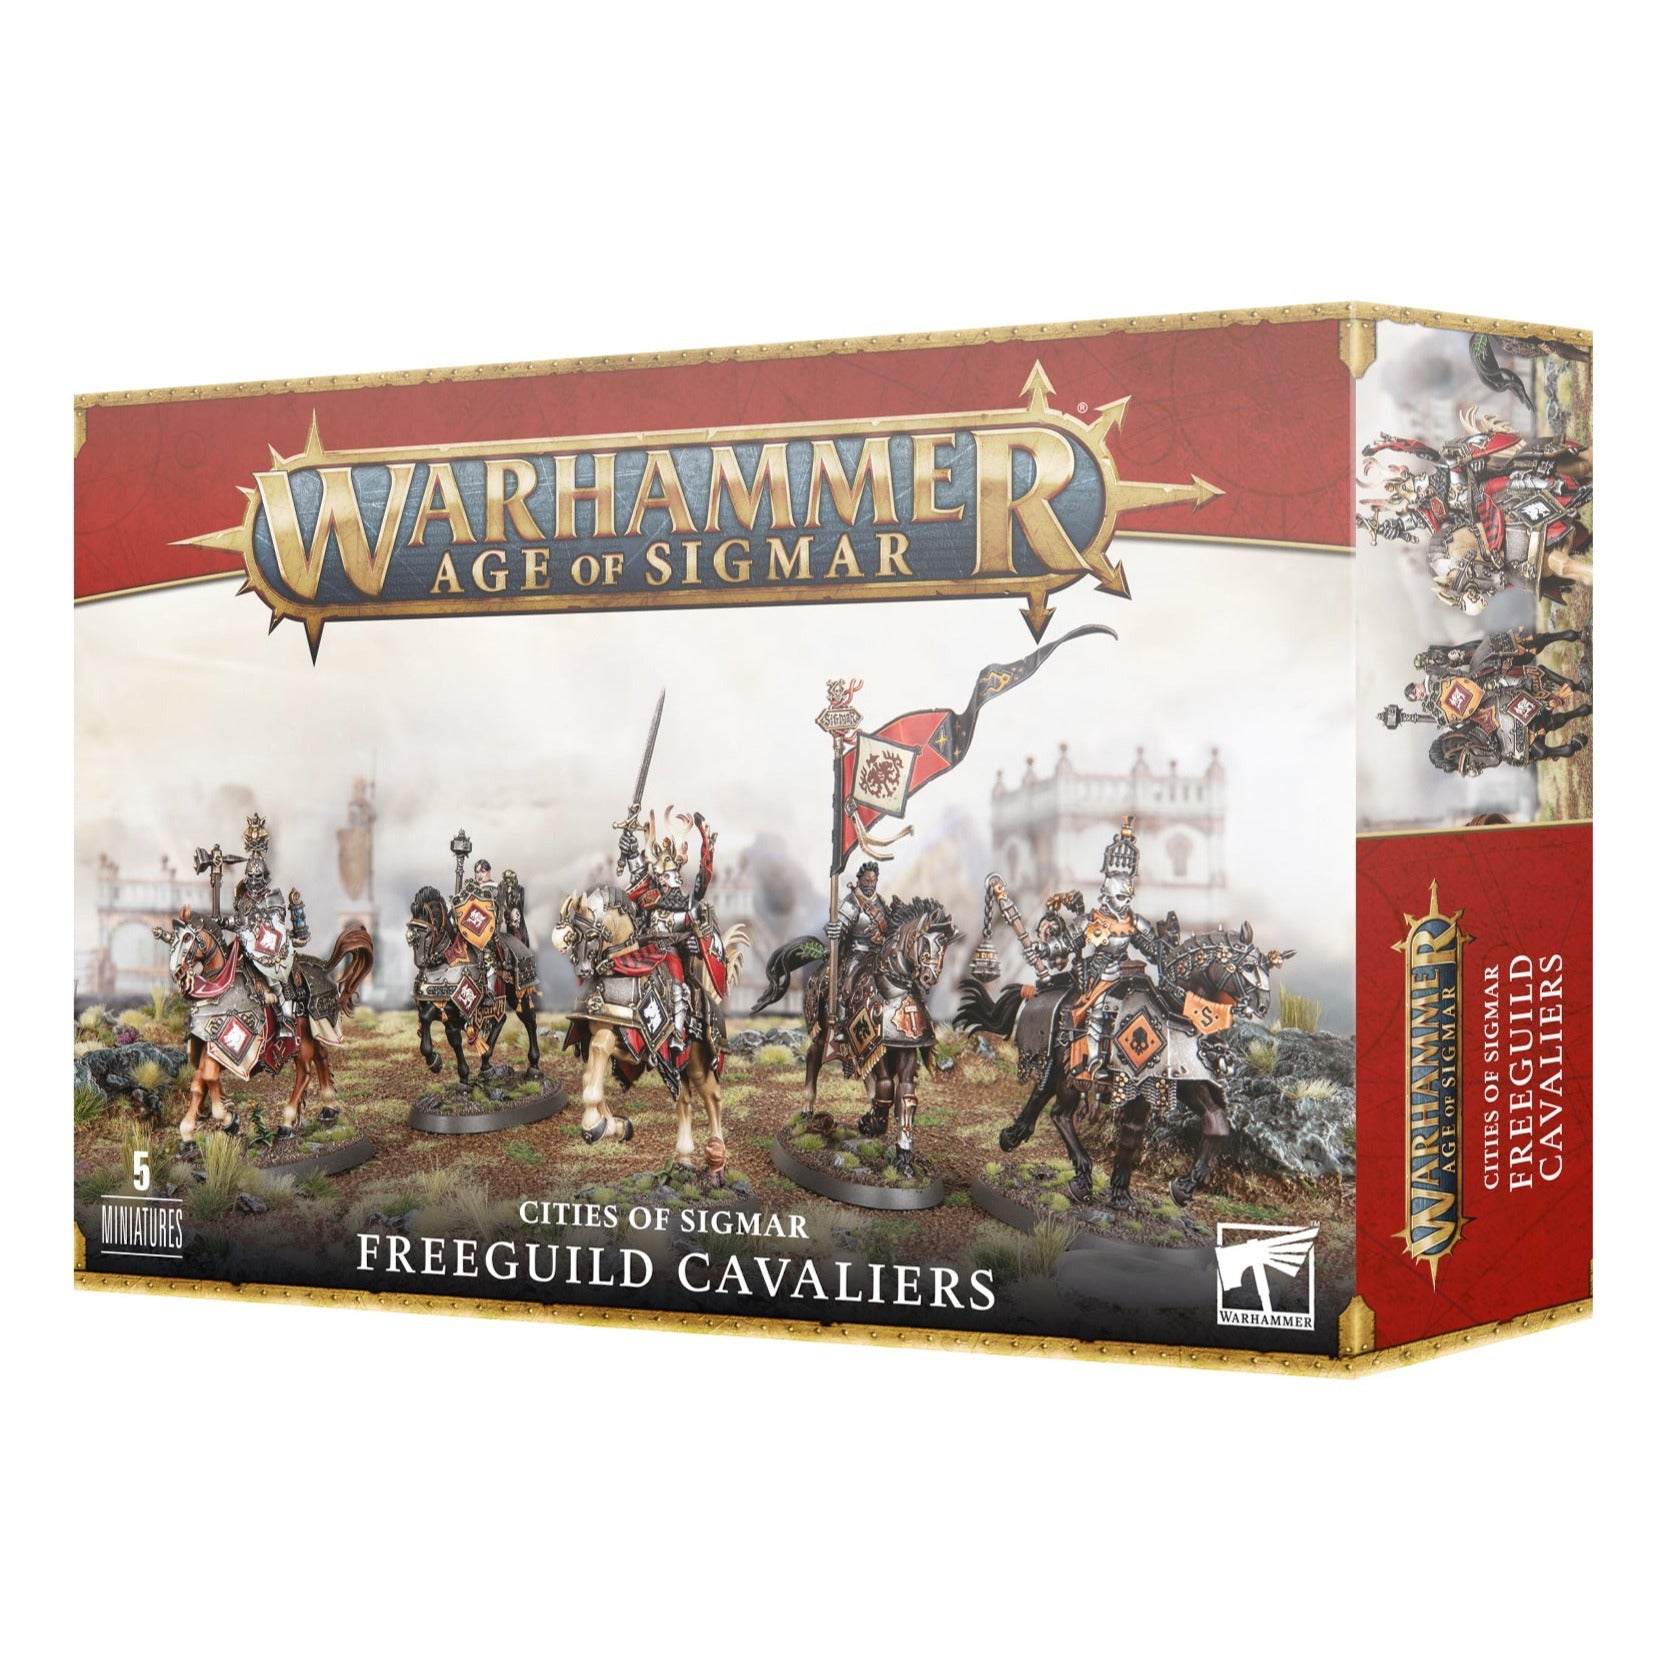 Cities of Sigmar: Freeguild Cavaliers - Release Date 11/11/23 - Loaded Dice Barry Vale of Glamorgan CF64 3HD